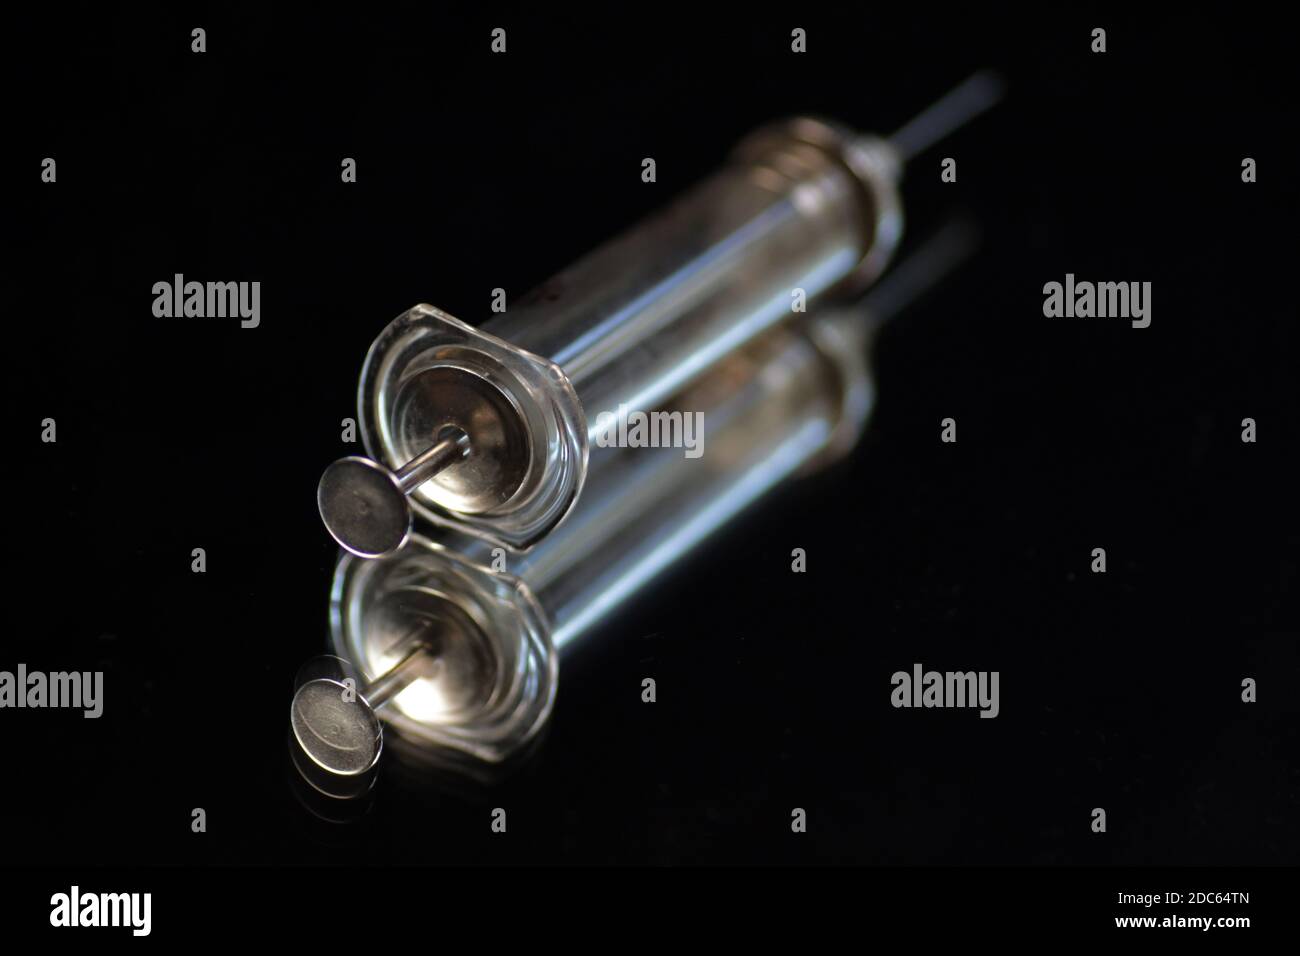 Glass syringe for injection in hospital Stock Photo